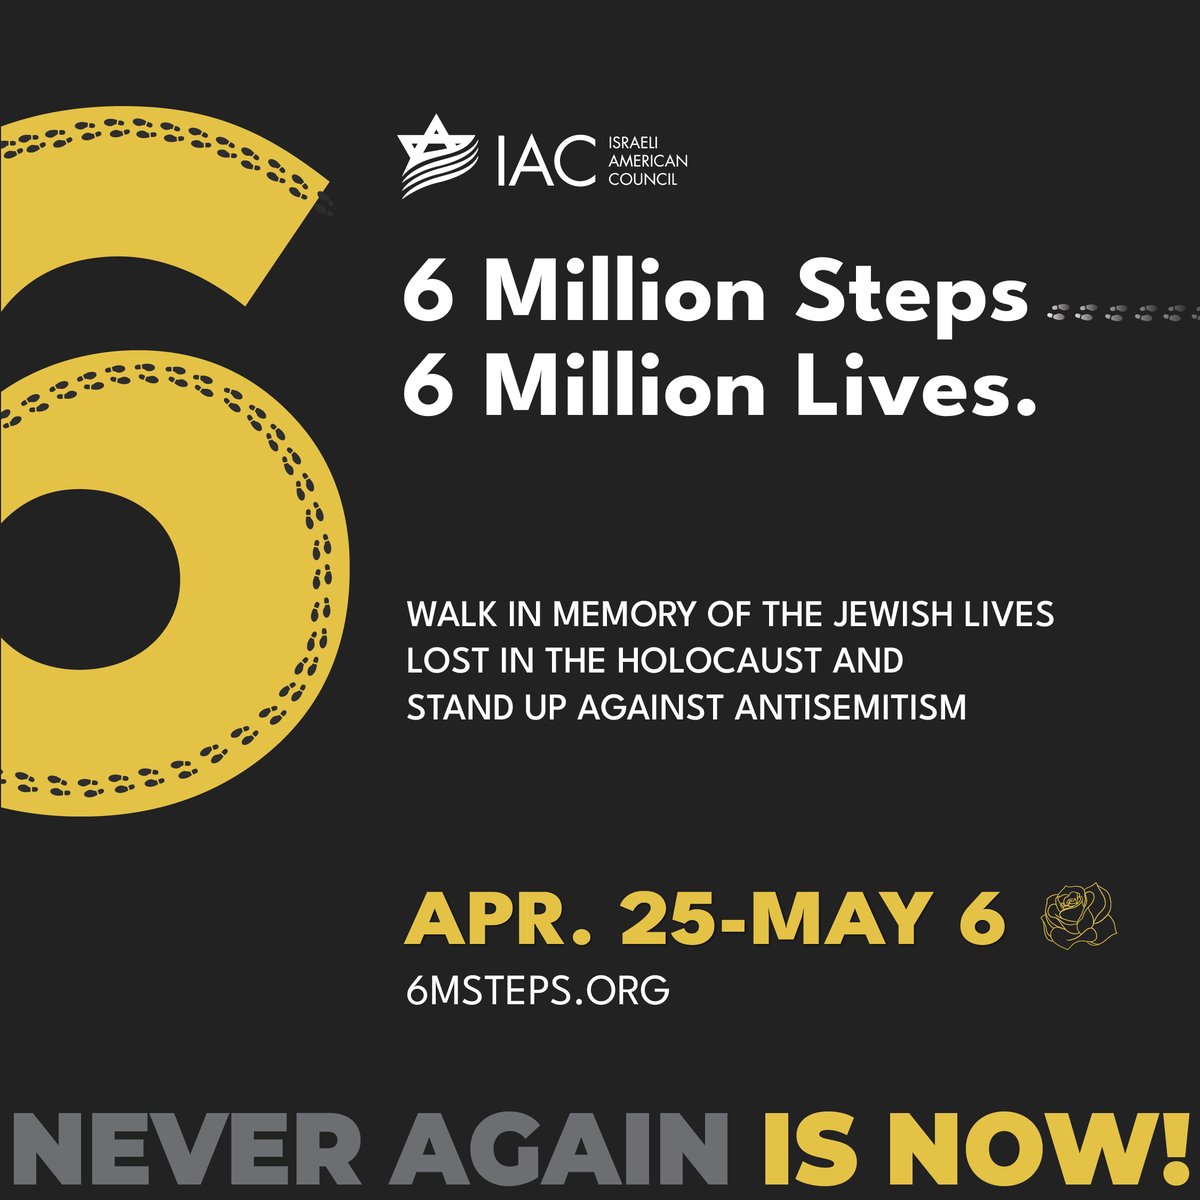 Now is the time to share the Jewish Nations' message of 𝐍𝐄𝐕𝐄𝐑 𝐀𝐆𝐀𝐈𝐍 𝐈𝐒 𝐍𝐎𝐖. Join us in honoring Holocaust Remembrance Day with the IAC's 6 Million Steps Campaign. Walk\run and record your steps at 6msteps.org #6MillionSteps #NeverAgainIsNow